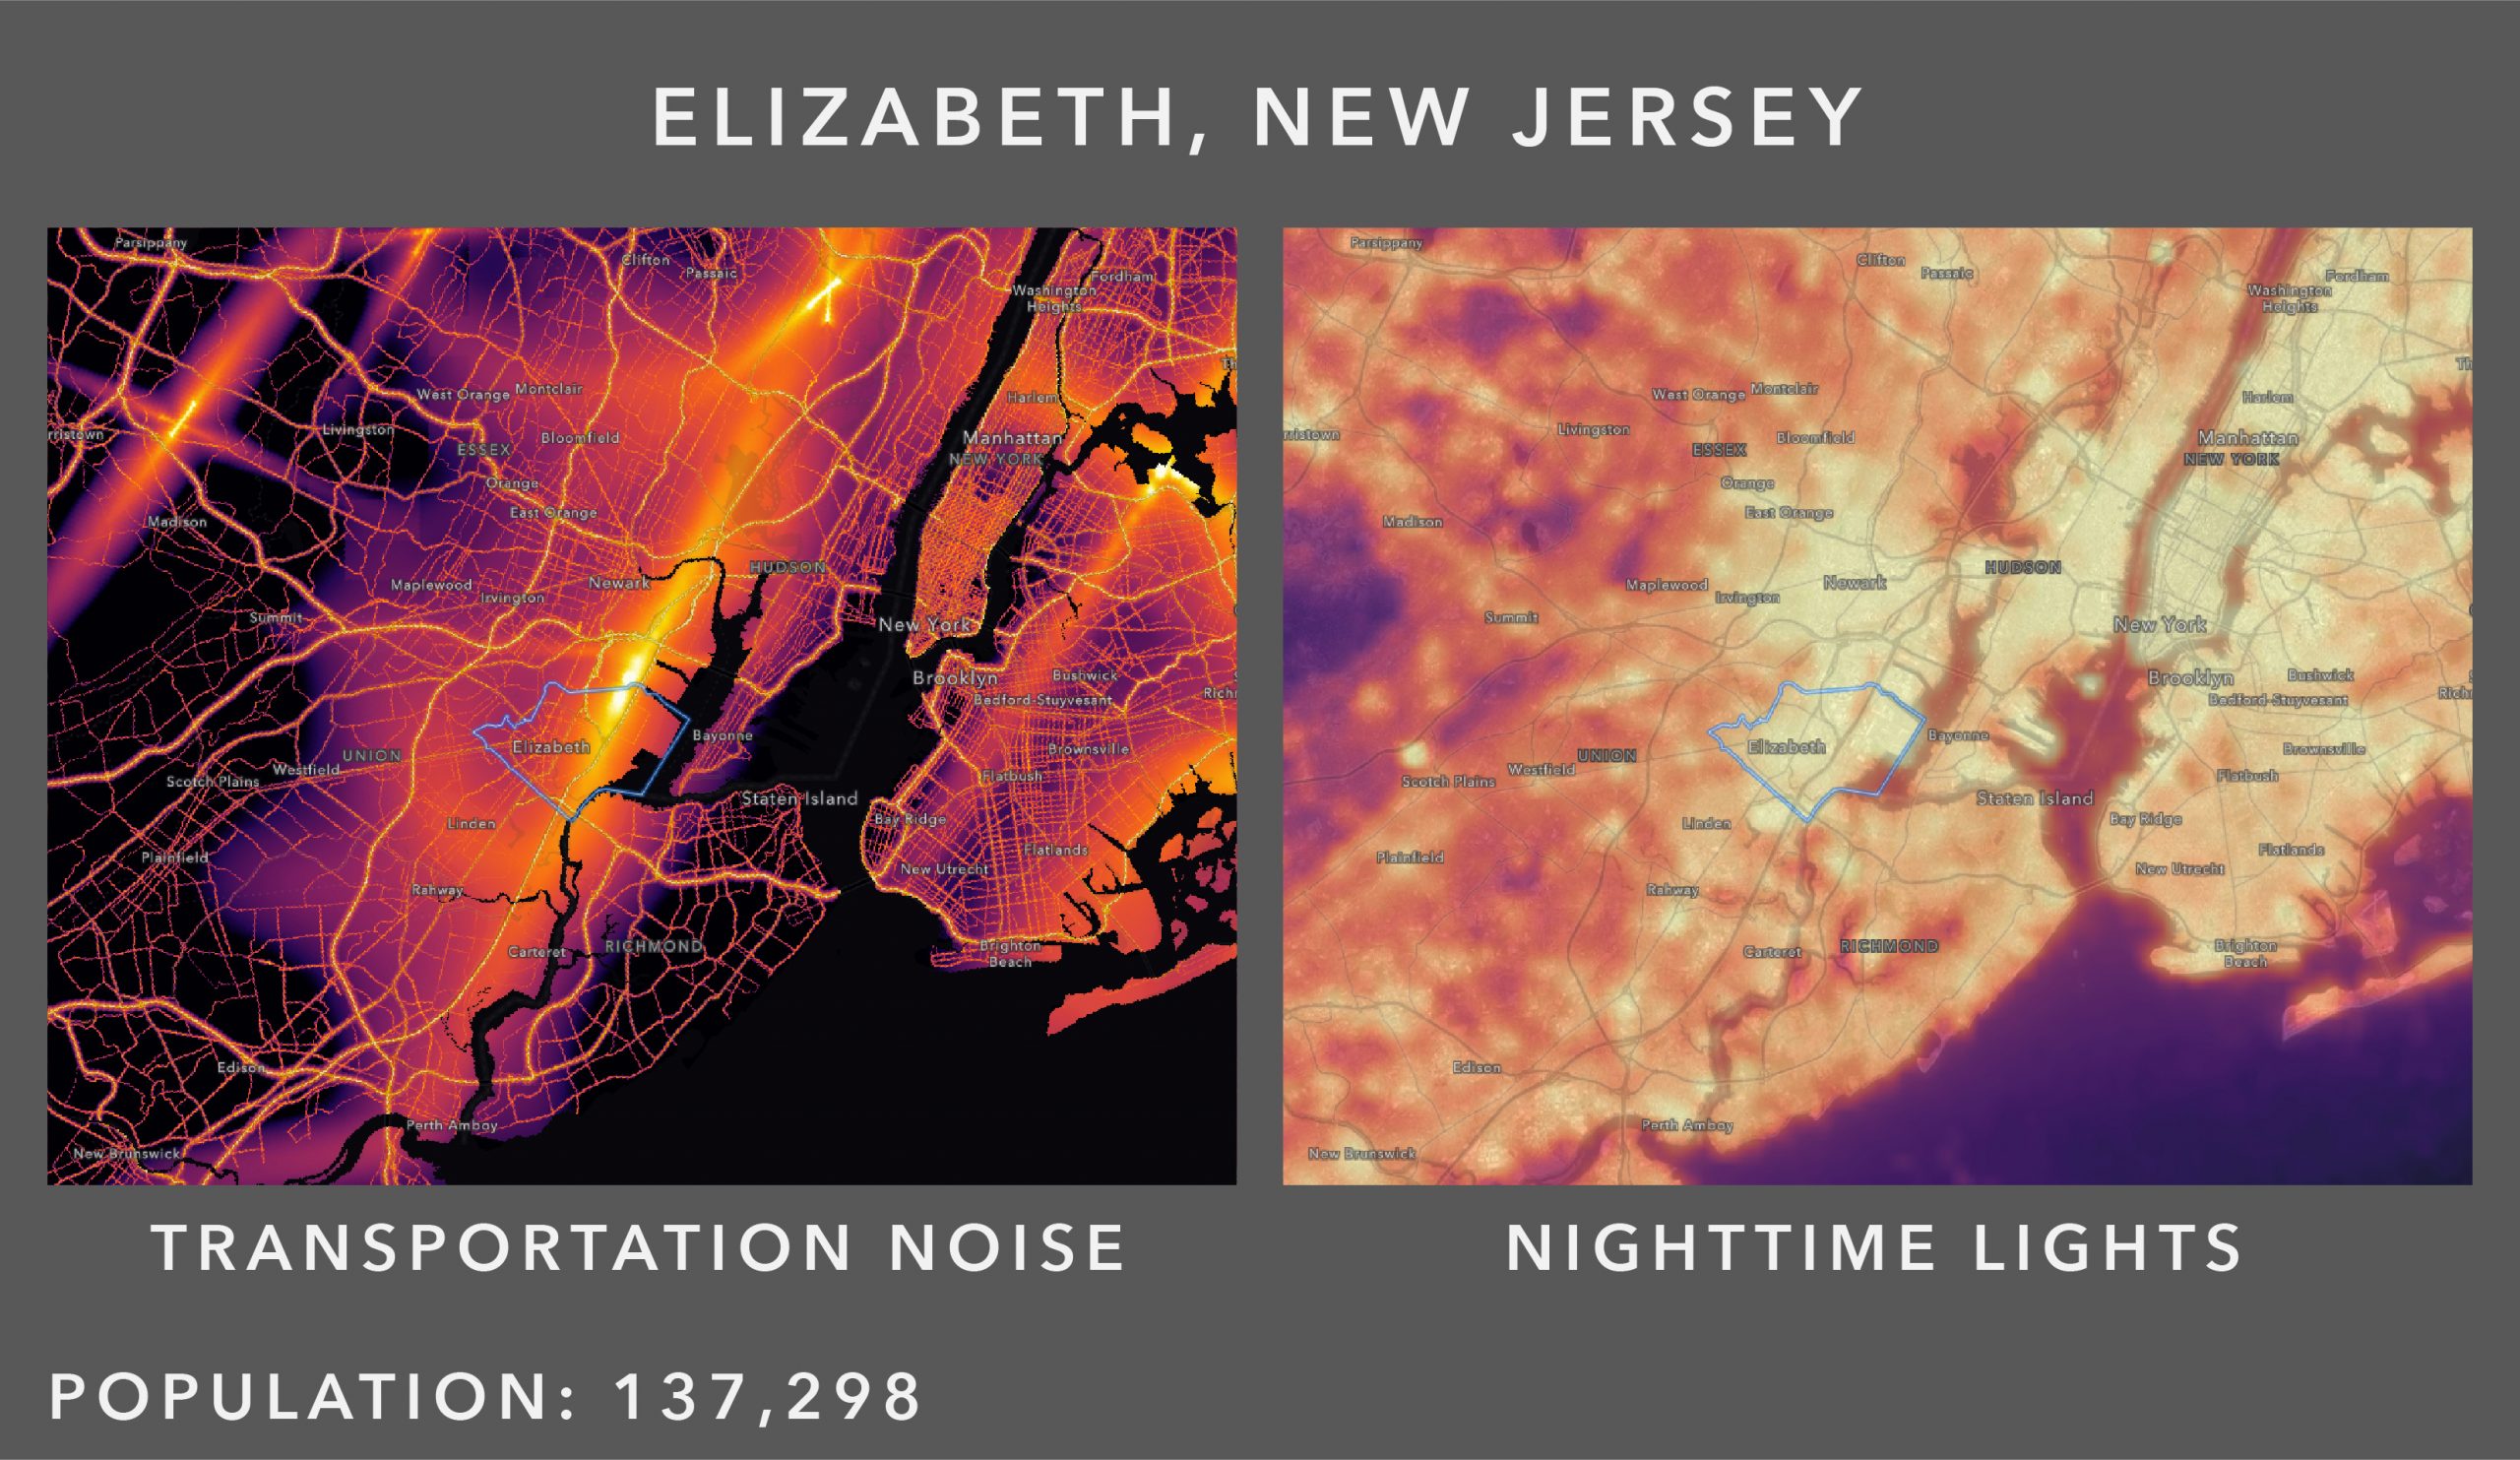 Noise and nighttime lights patters for Elizabeth, New Jersey.